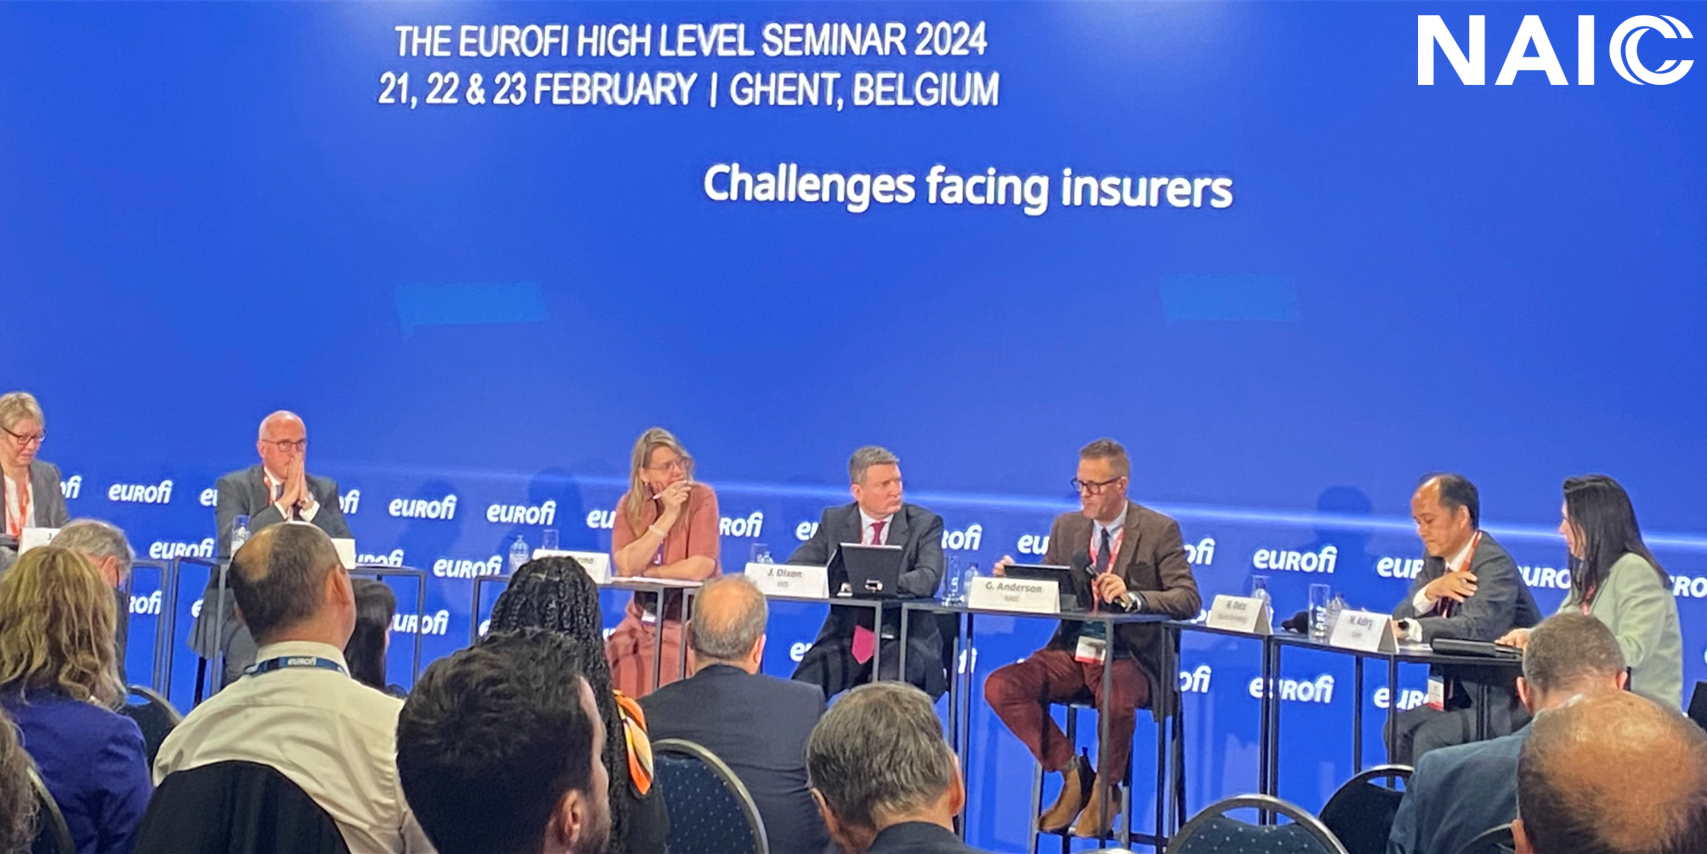 On February 21, Massachusetts Division of Insurance Commissioner Gary D. Anderson, chair of the NAIC’s International Insurance Relations (G) Committee, participated in a panel at the Eurofi High Level Forum titled “Challenges Facing Insurers.”  Anderson is pictured with six other panelists.